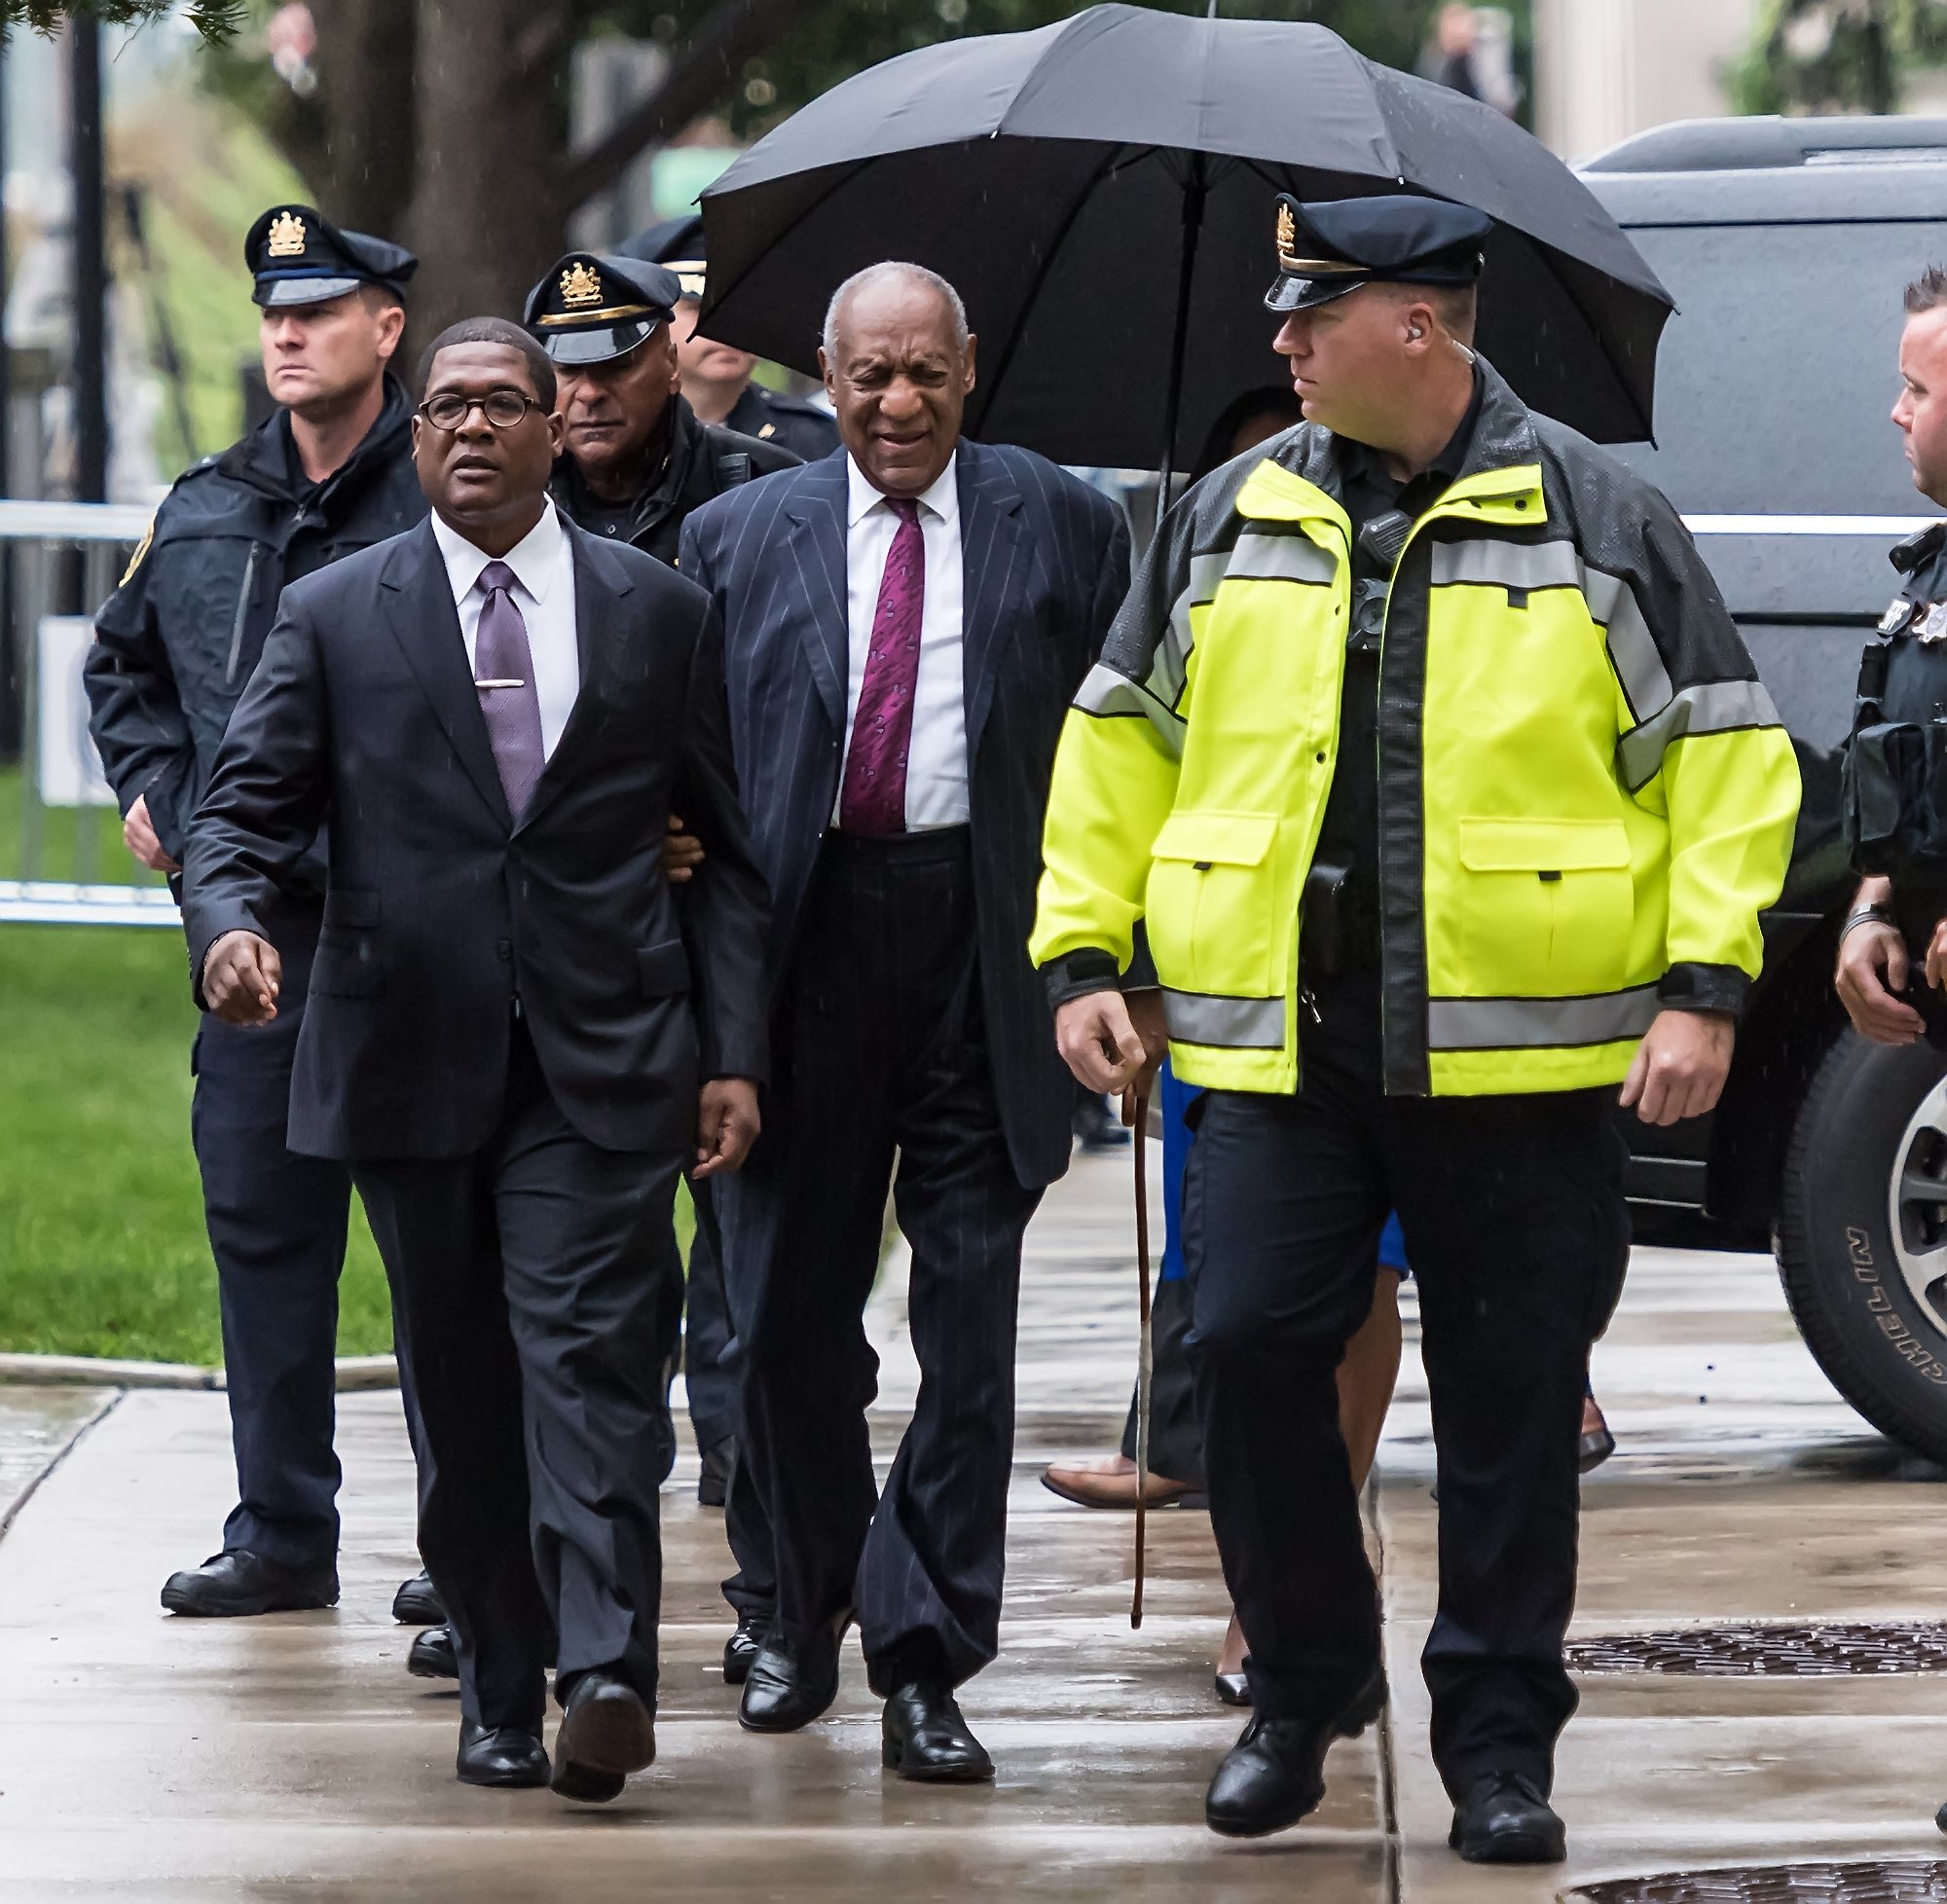 Bill Cosby arrives for sentencing for his sexual assault trial at the Montgomery County Courthouse on Sept. 25, 2018 in Pennsylvania | Photo: Getty Images